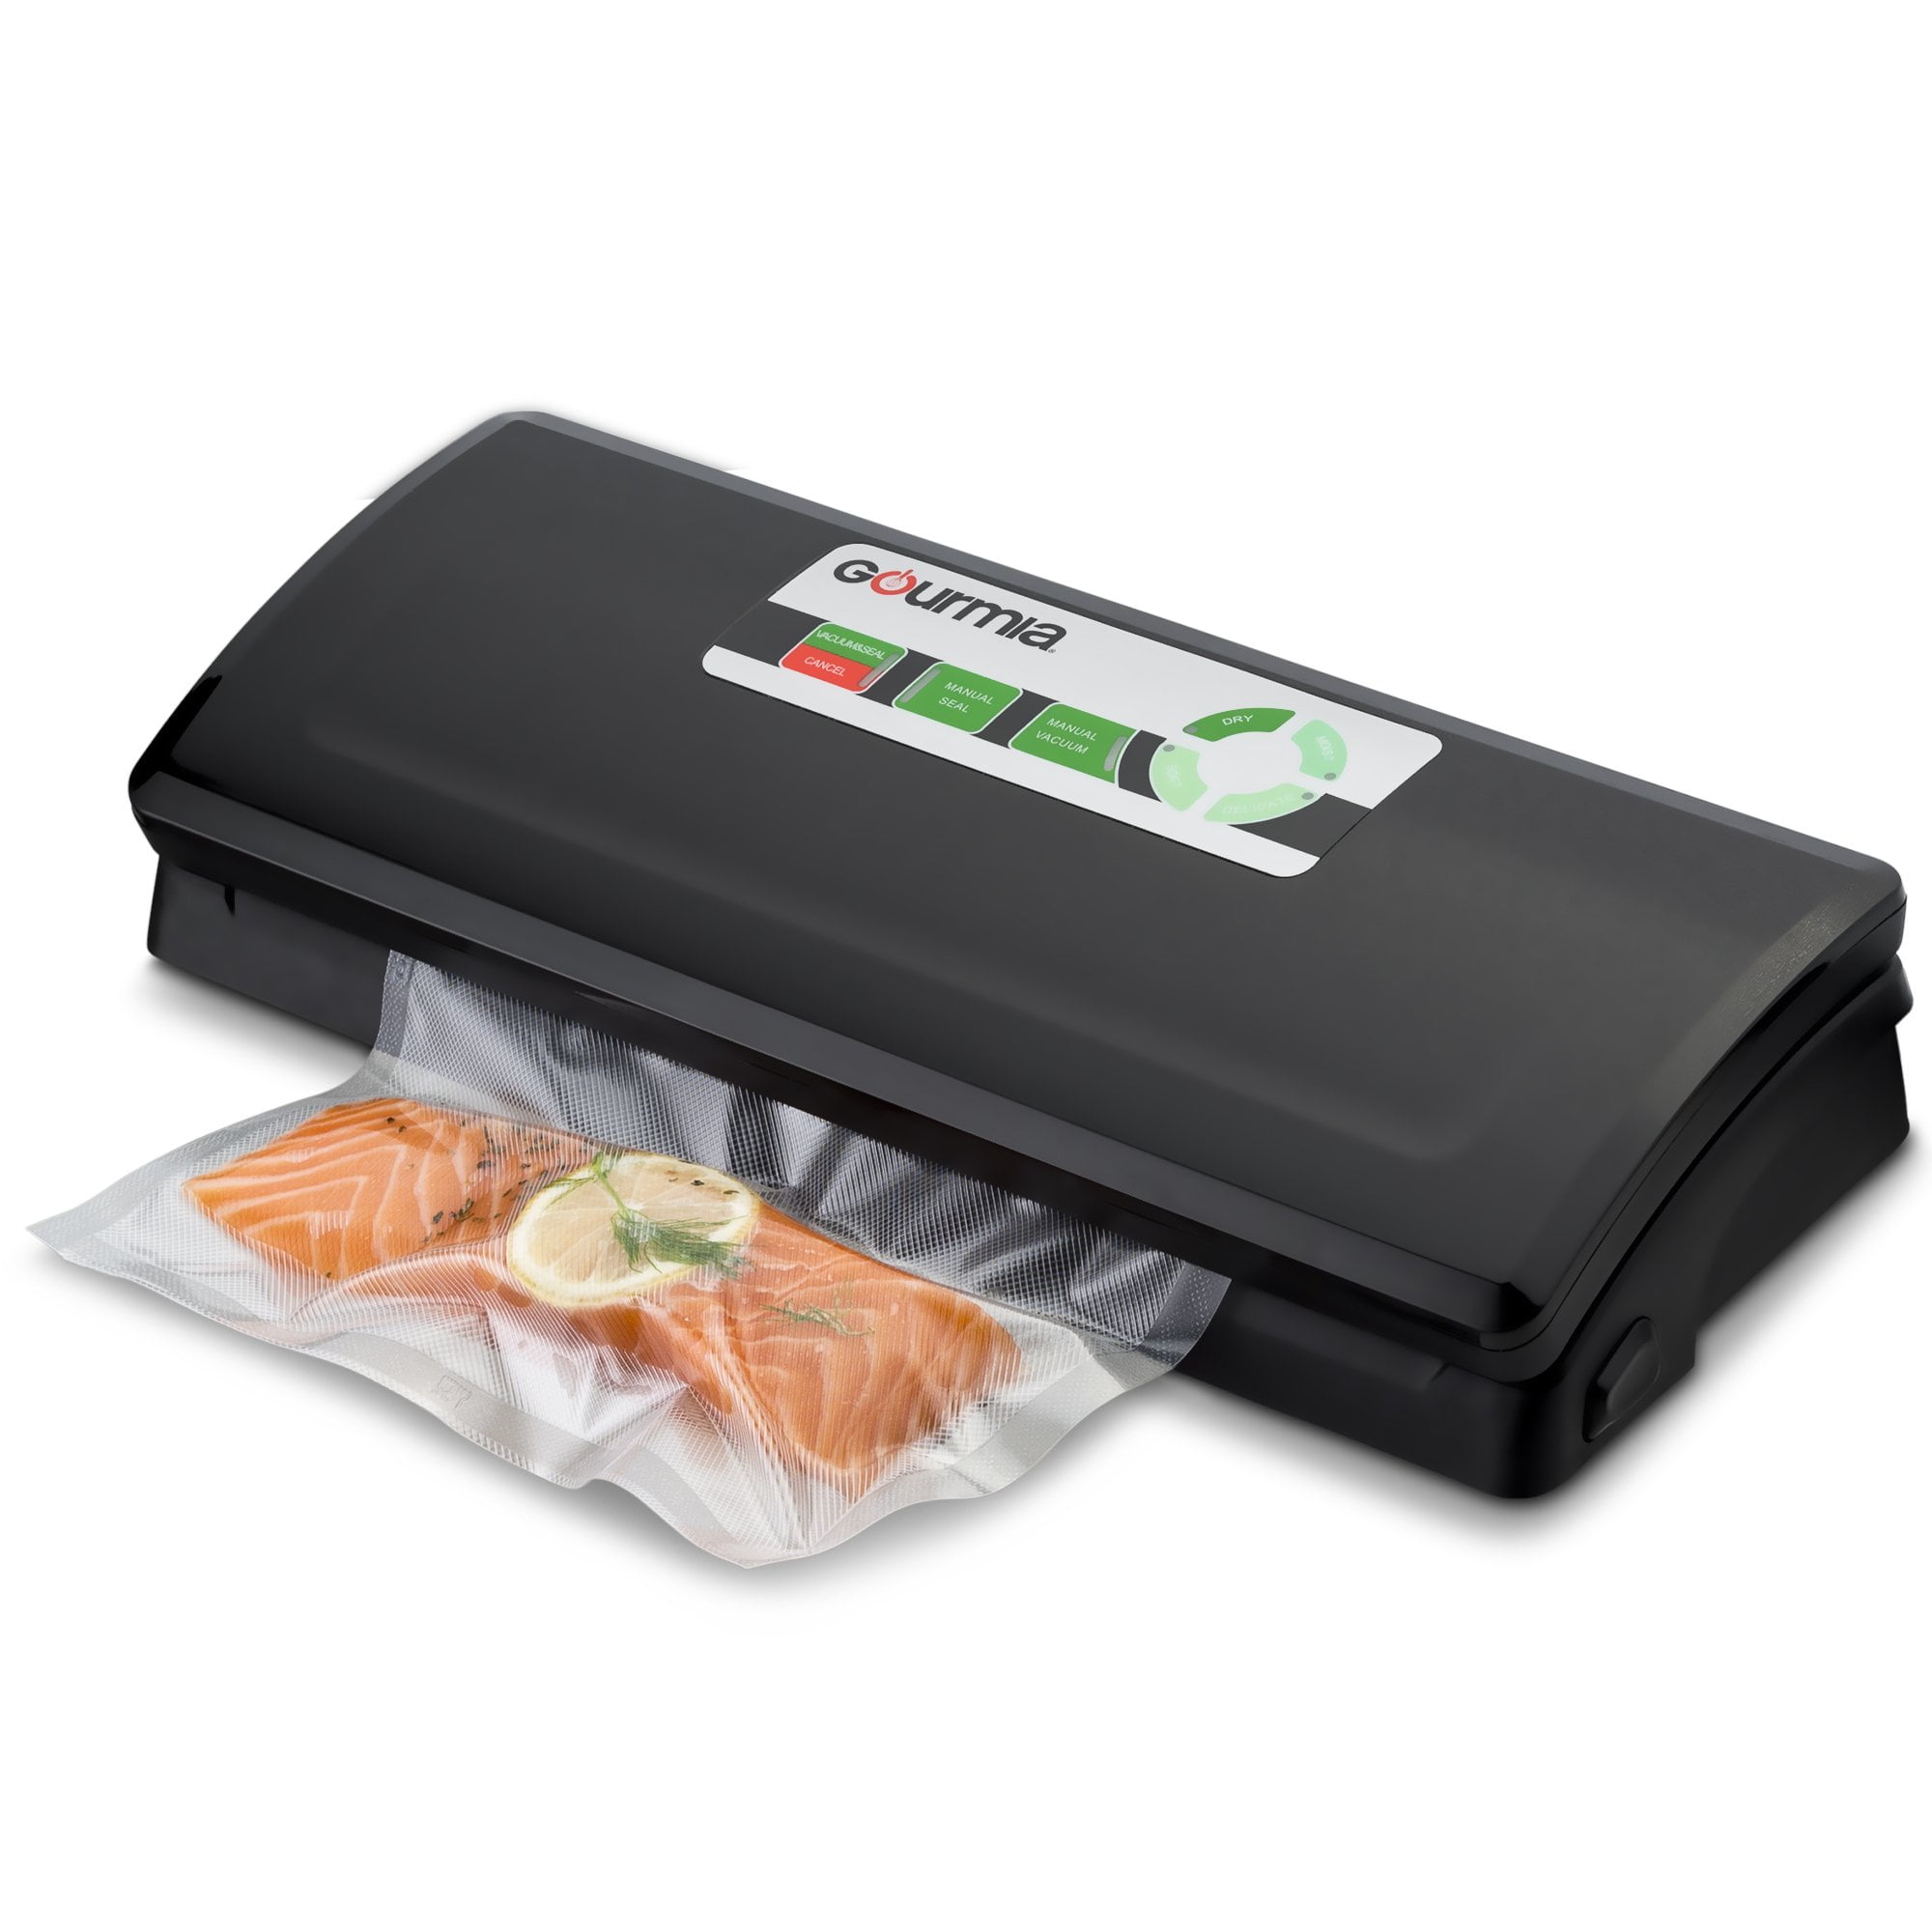 FAST FREE SHIPPING! Details about   Gourmia Compact Vacuum Food Sealer GVS445 